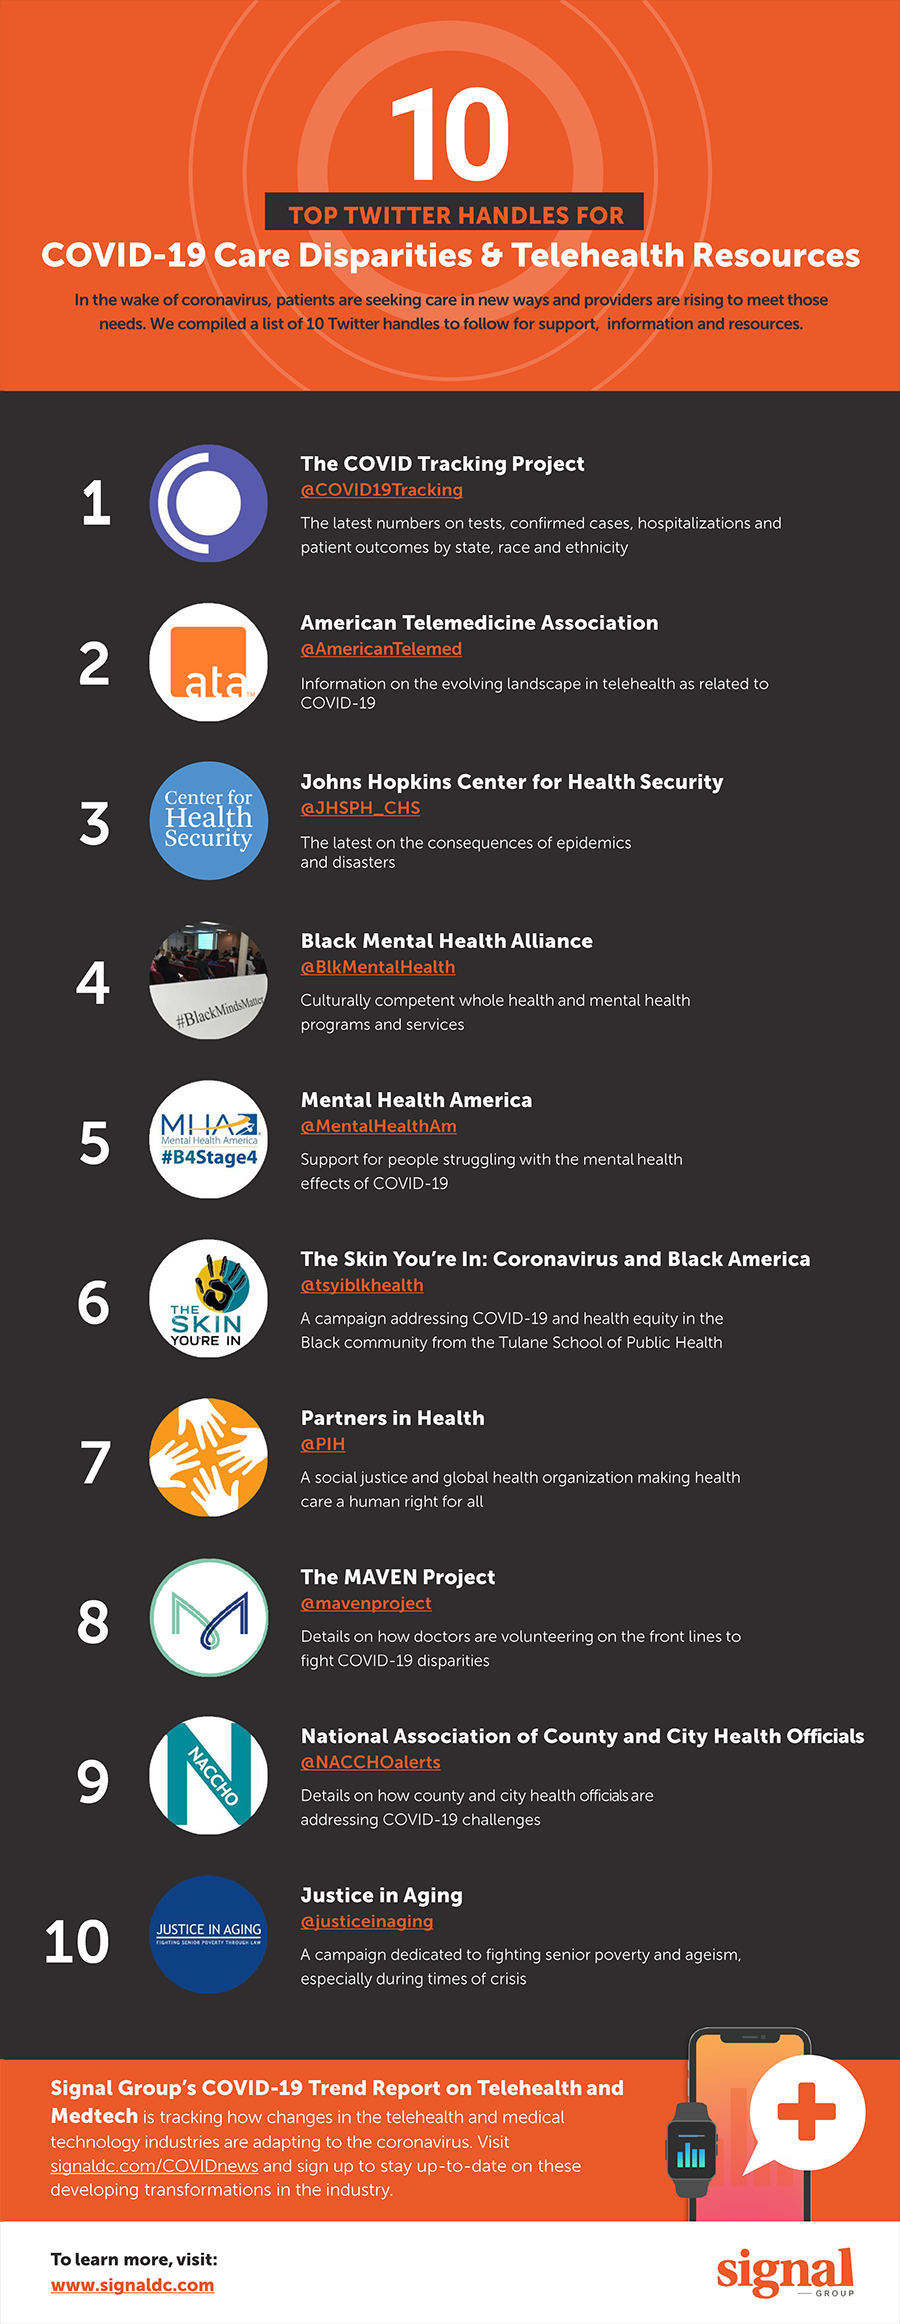 10 Top Handles to Follow for COVID-19 Care Disparities & Telehealth Resources